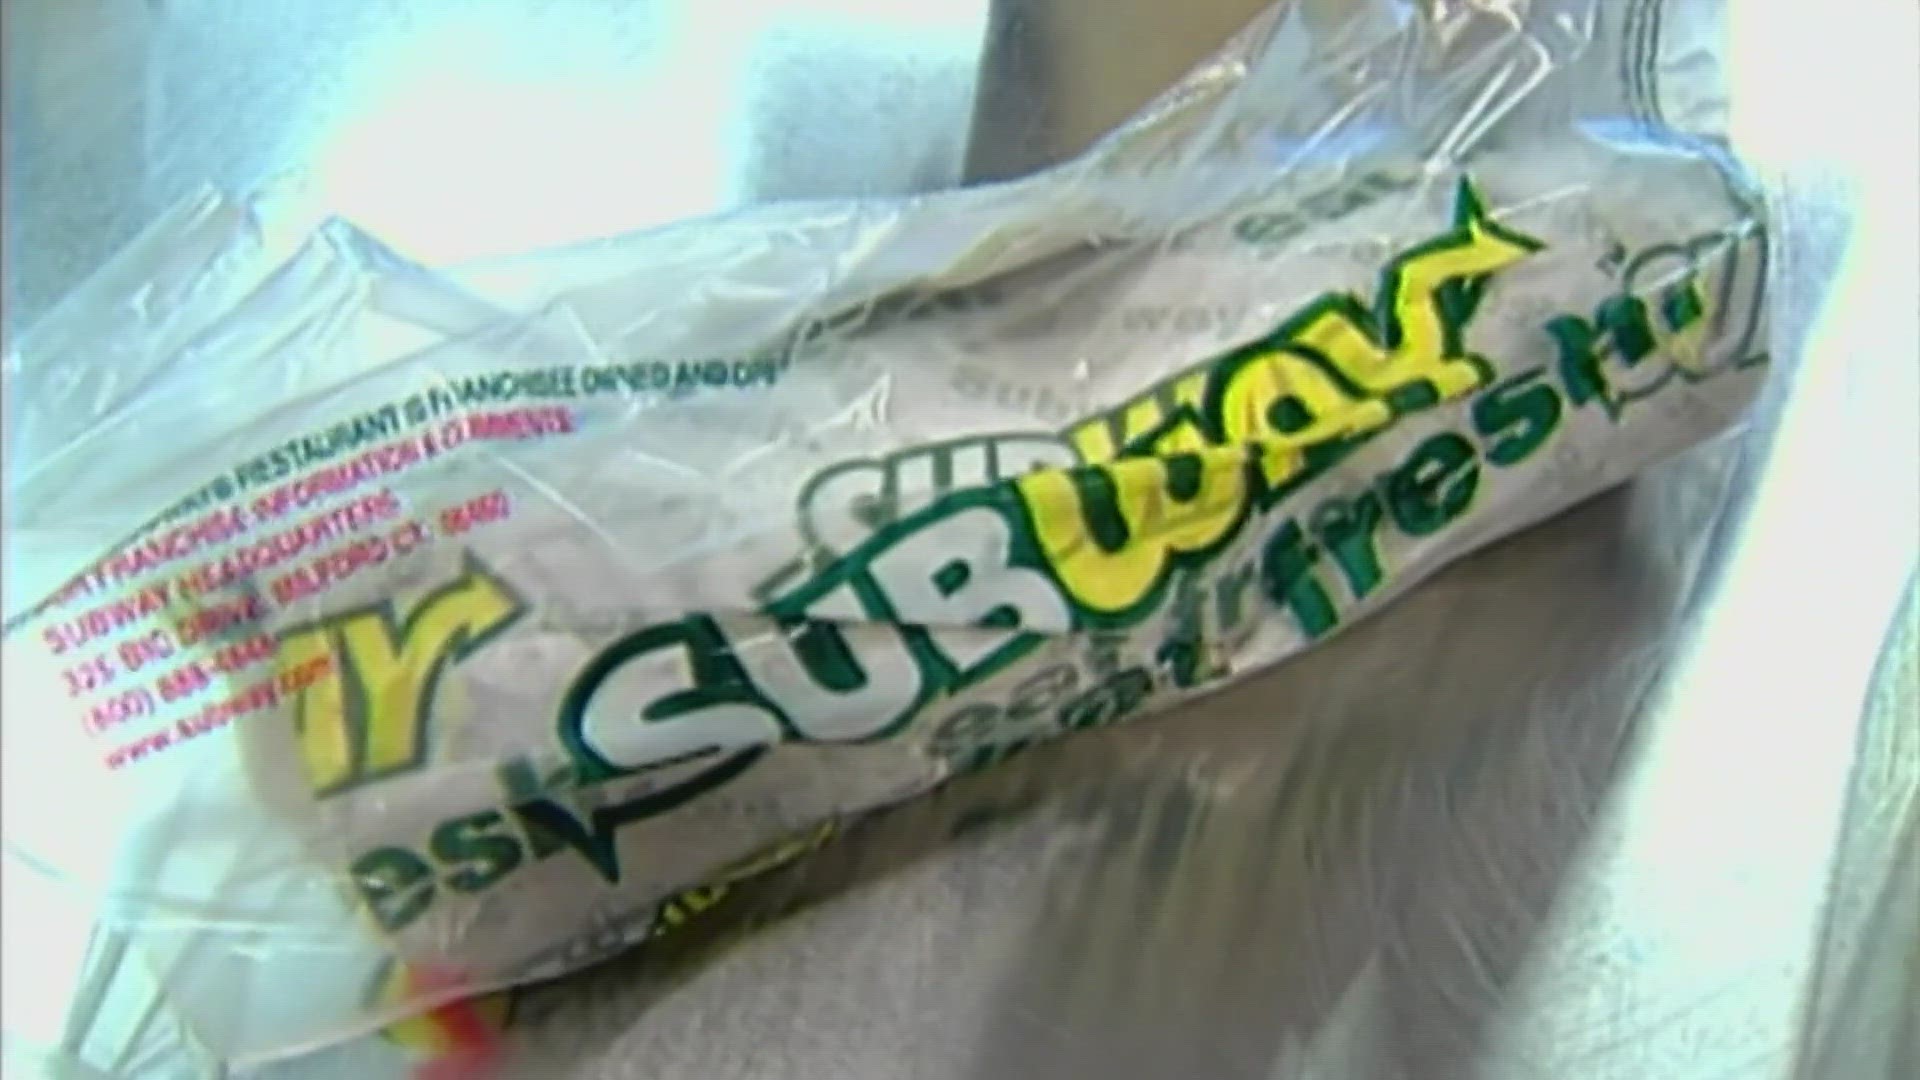 Would you change your first name to "Subway" for a lifetime of free sandwiches?